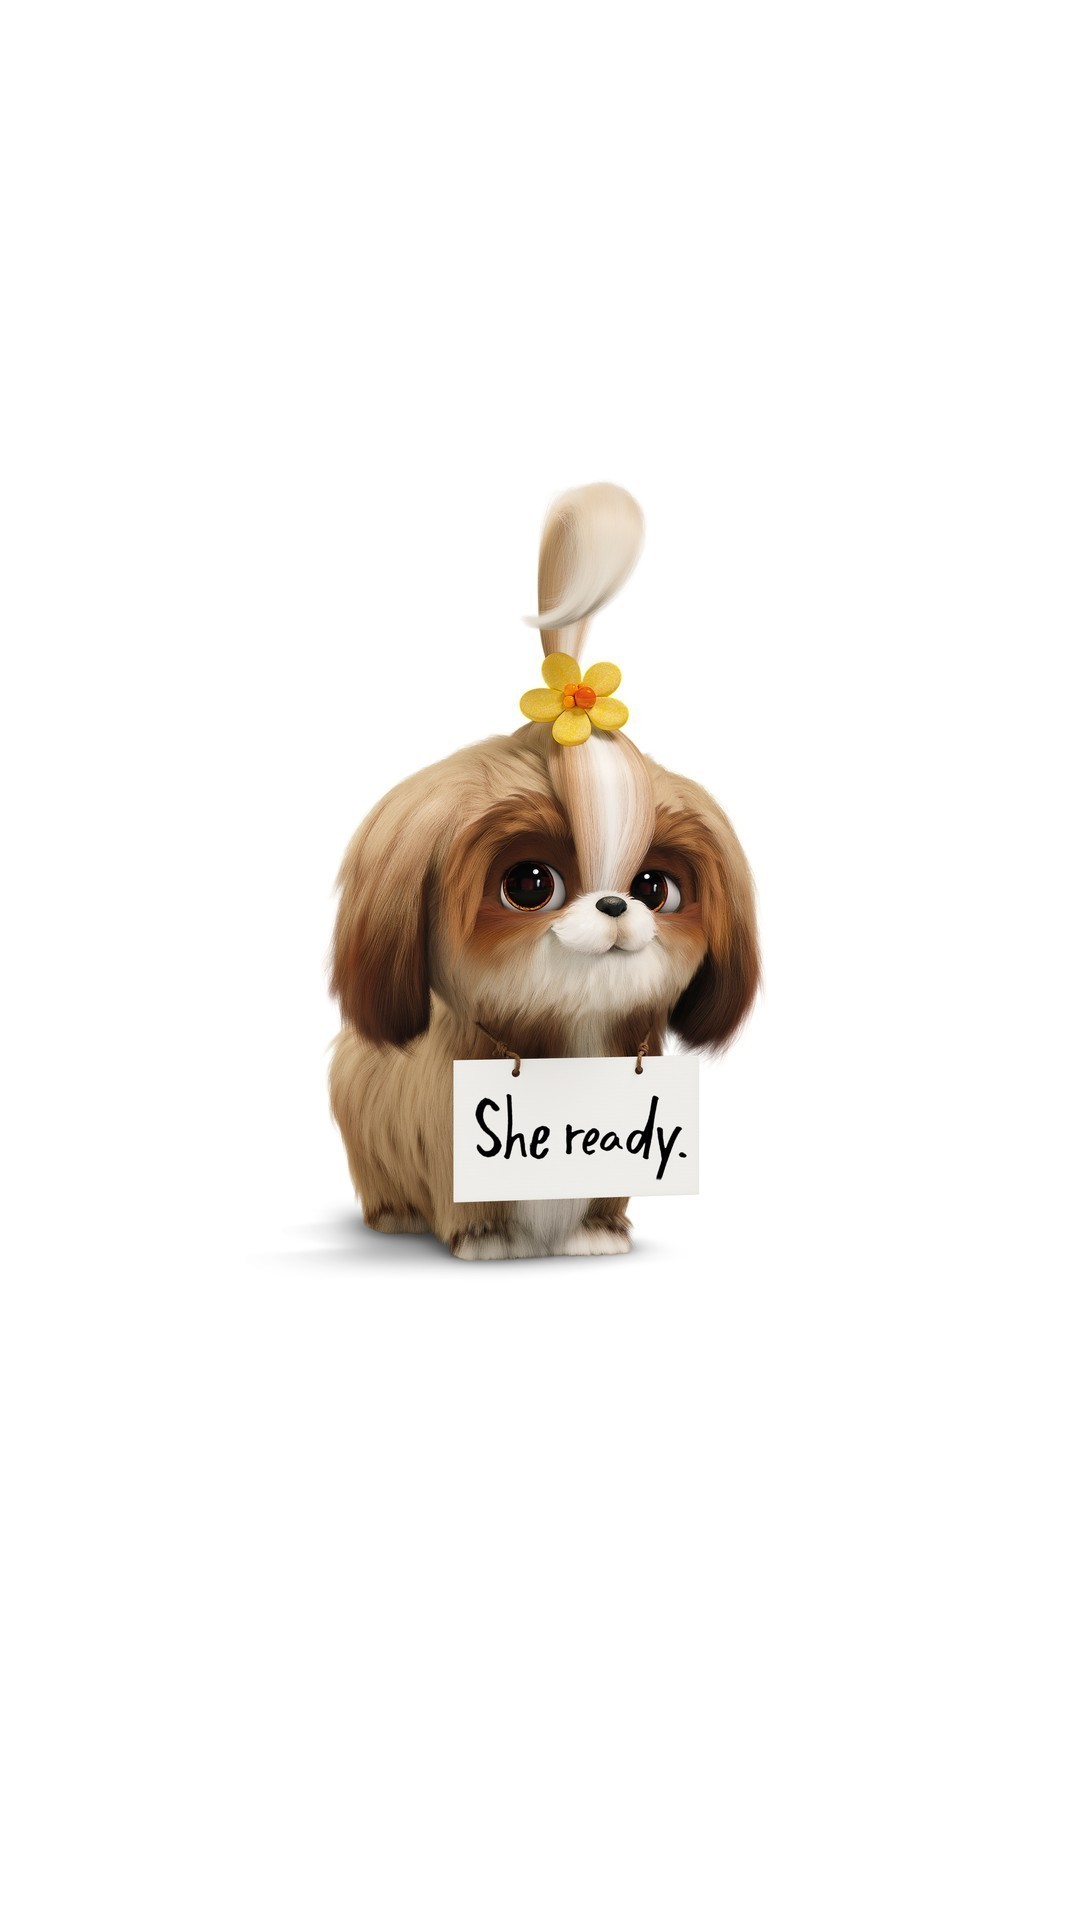 The Secret Life of Pets 2 Poster Movie   2021 Movie Poster 1080x1920